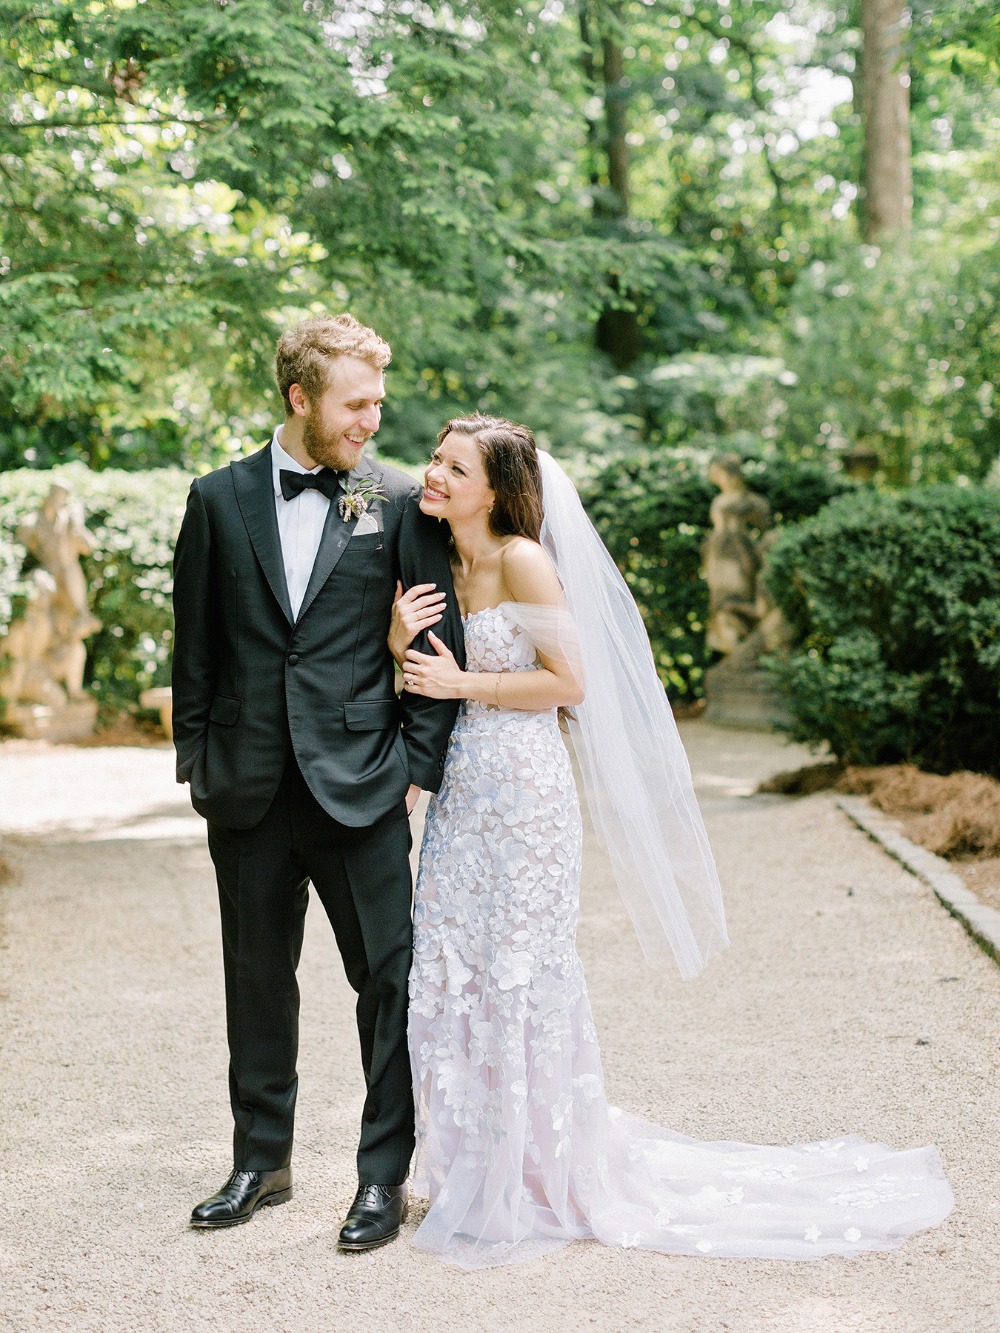 These two had a beautiful garden wedding